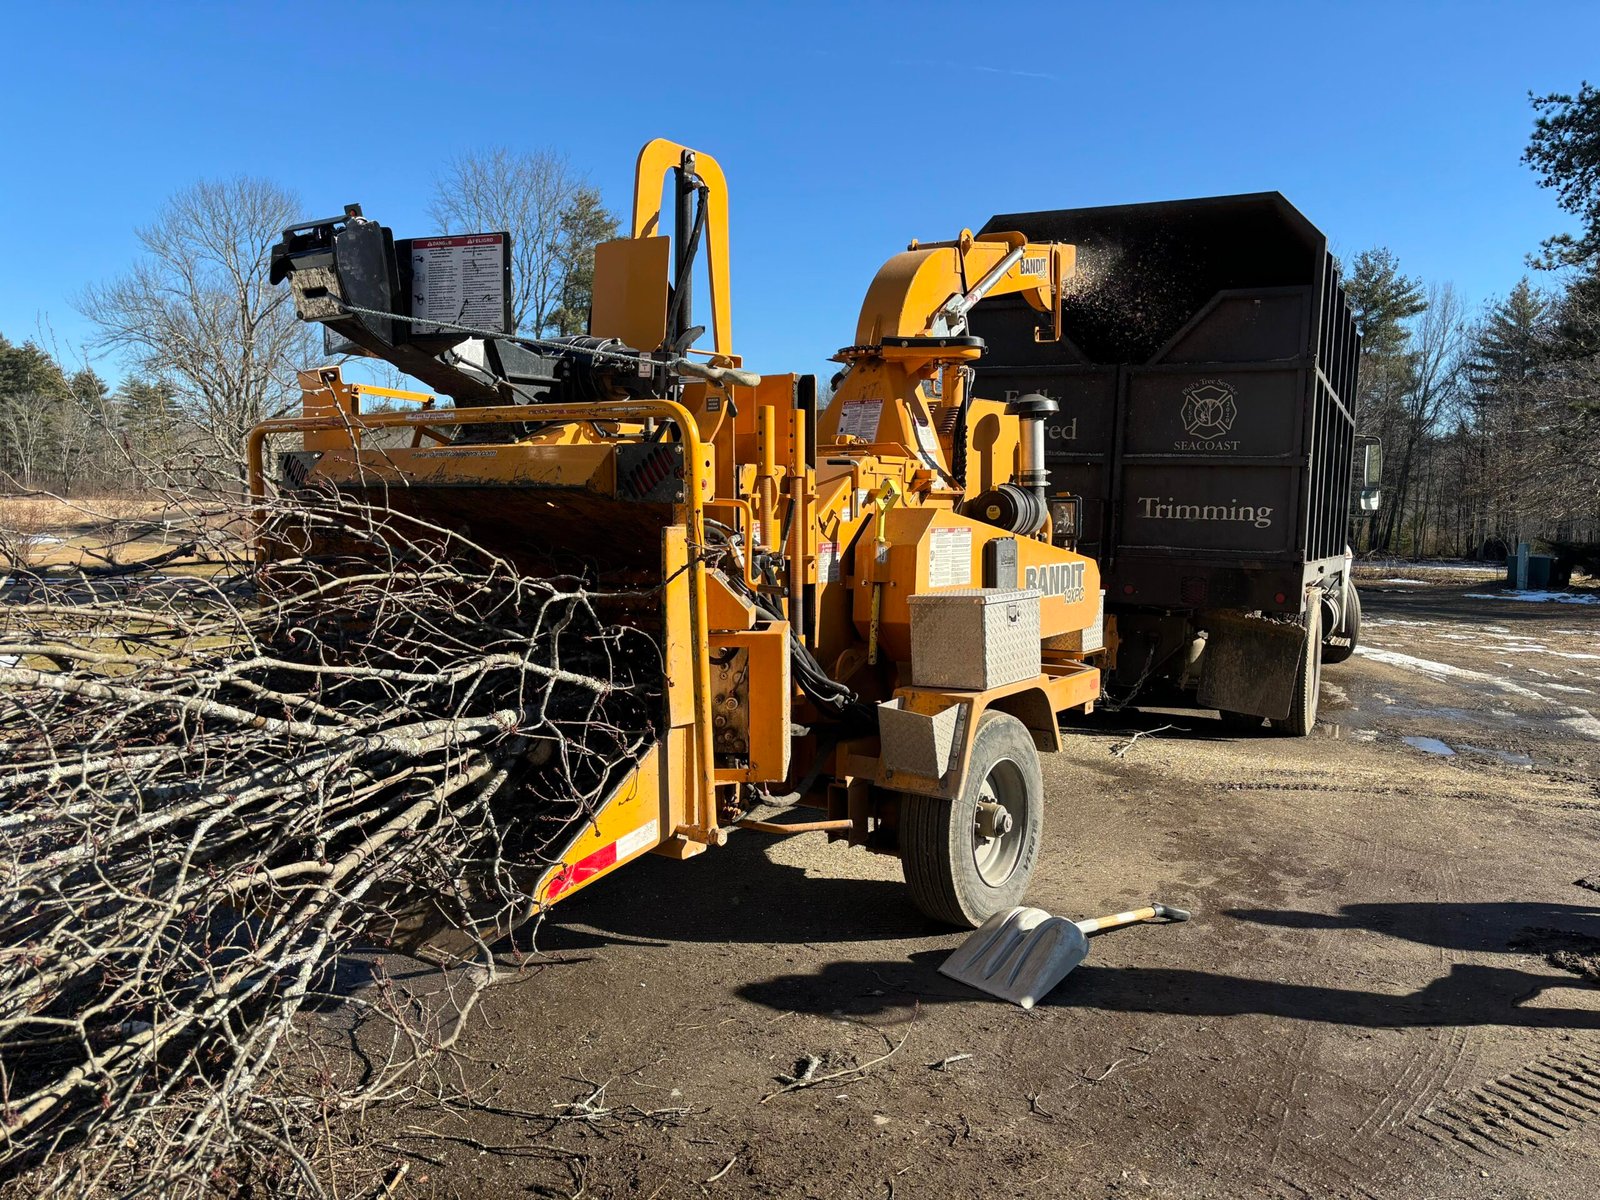 Brush chipper converting tree branches into wood chips